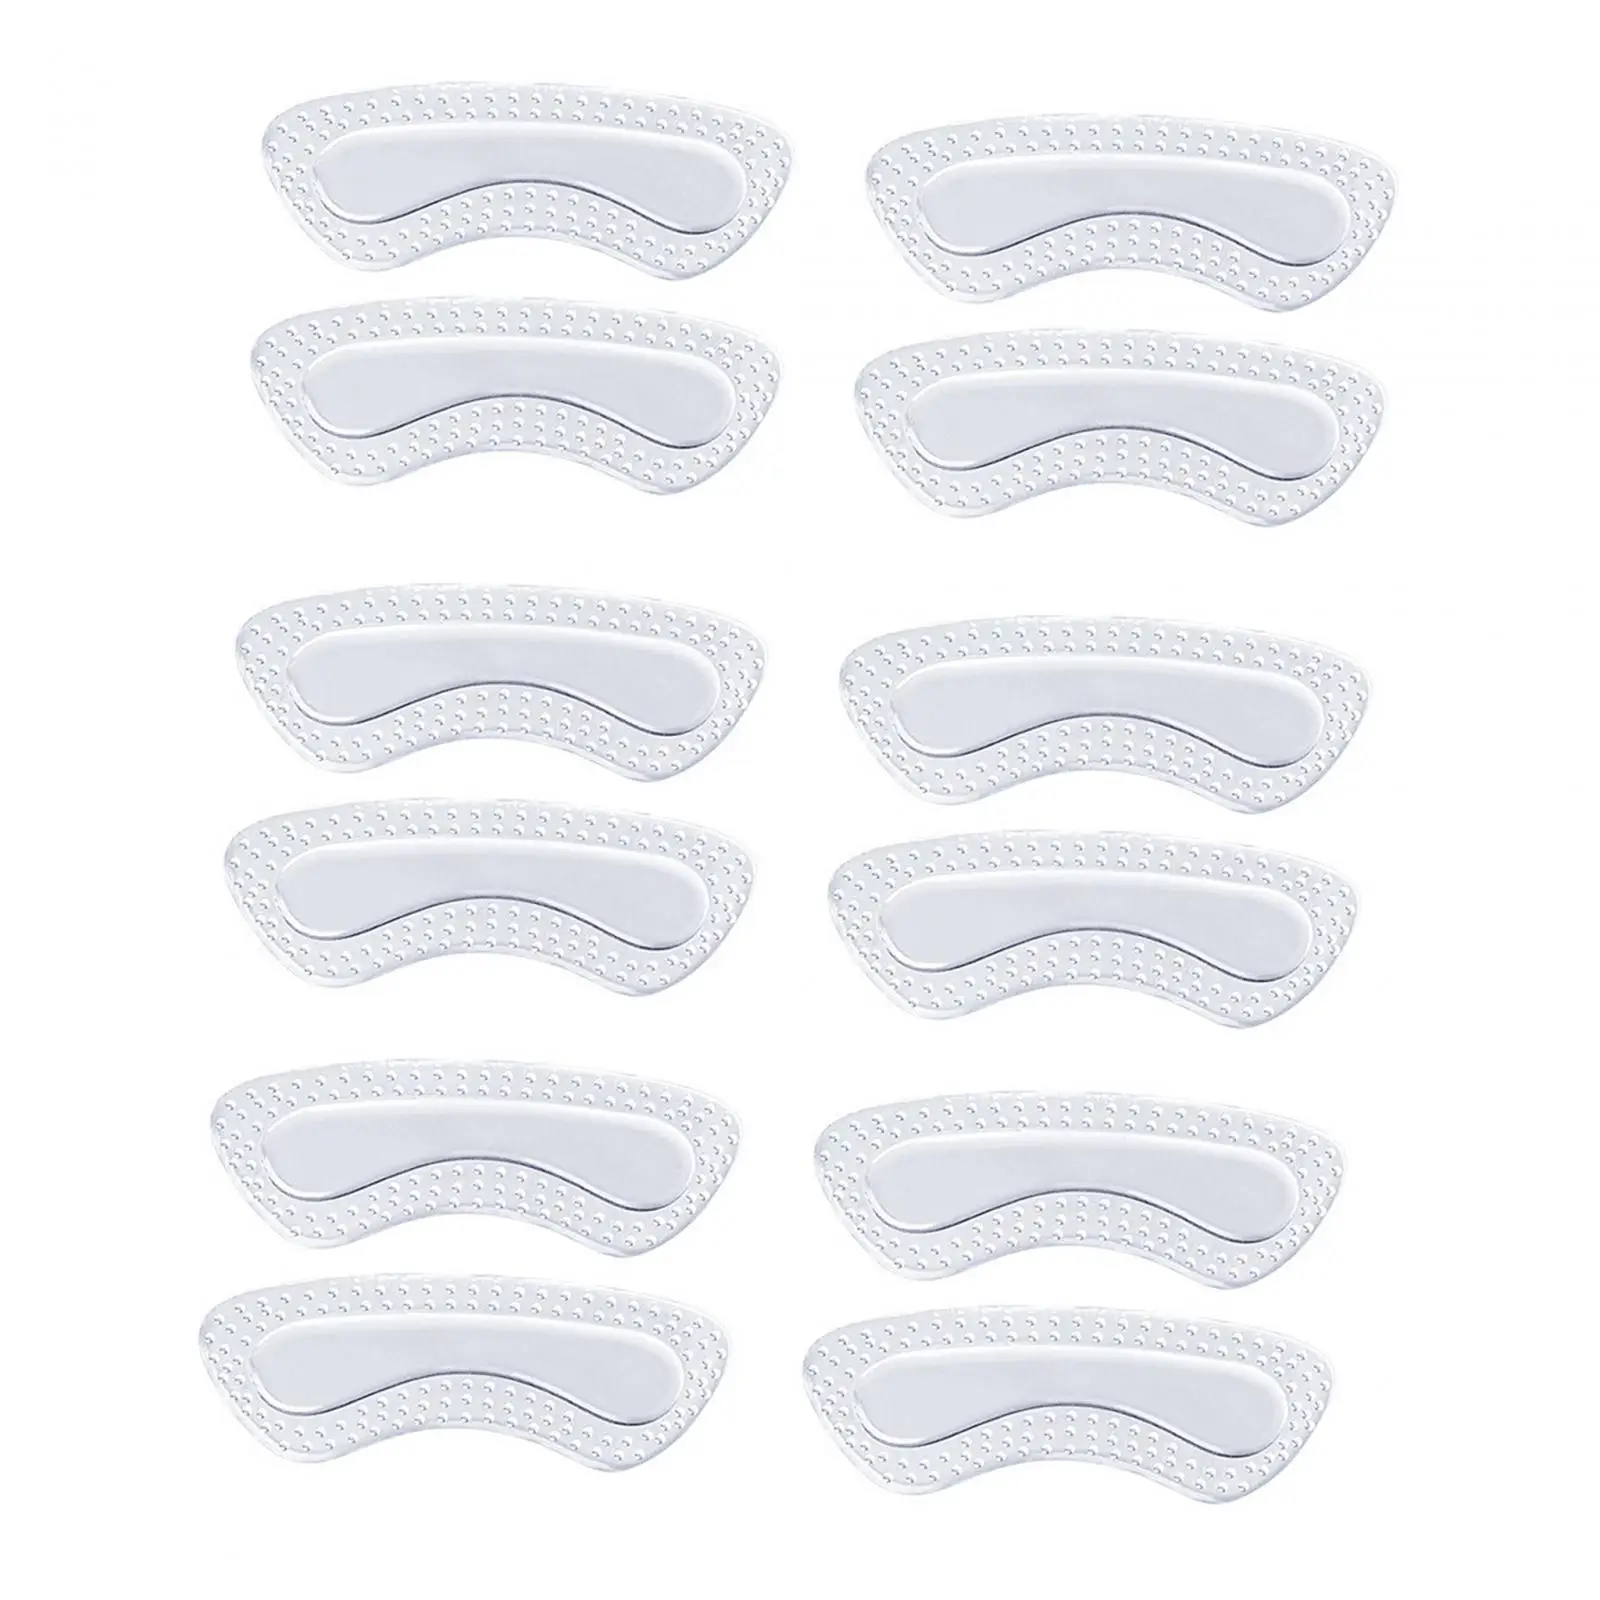 12x Back Heel Inserts Insoles Breathable Foot Care Shoe Pads Cushion Liner Grips Heel Protector for Women Men Running Shoes